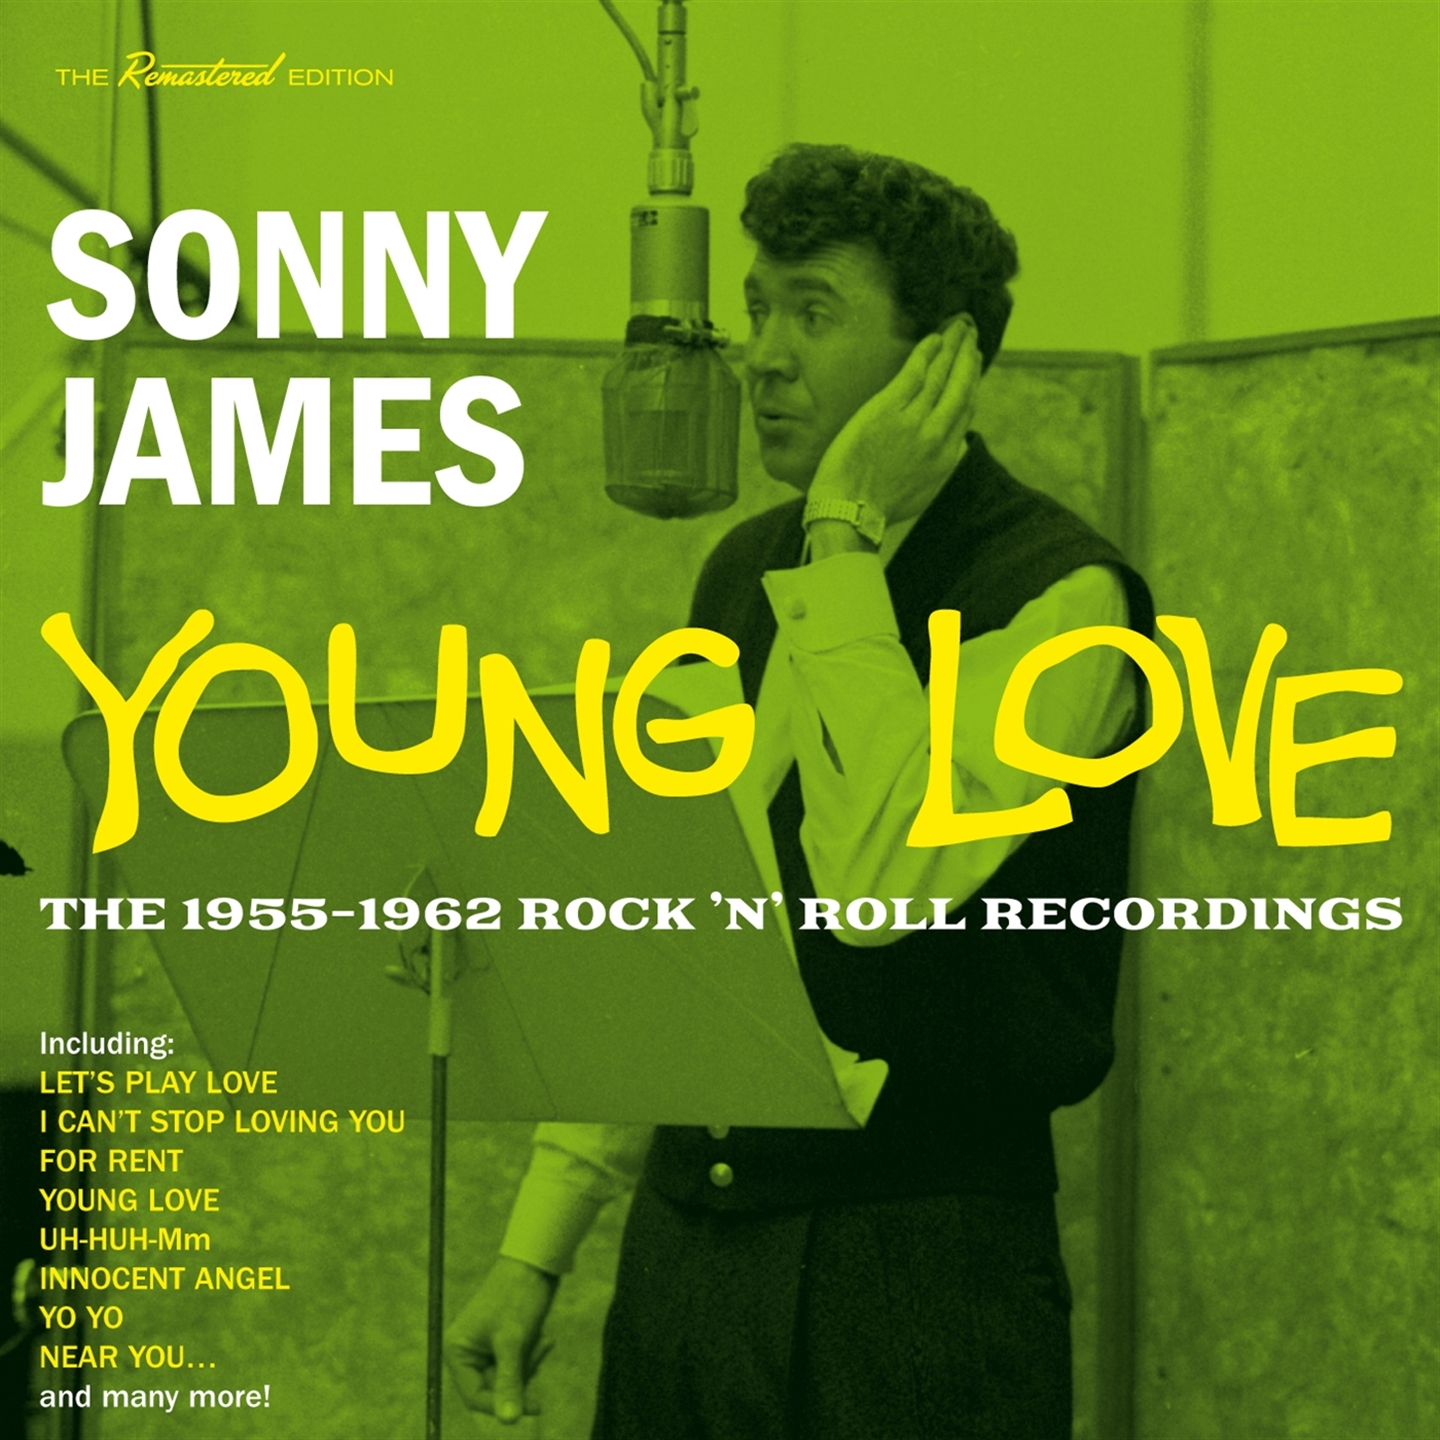 YOUNG LOVE - THE 1955-1962 ROCK 'N' ROLL RECORDINGS